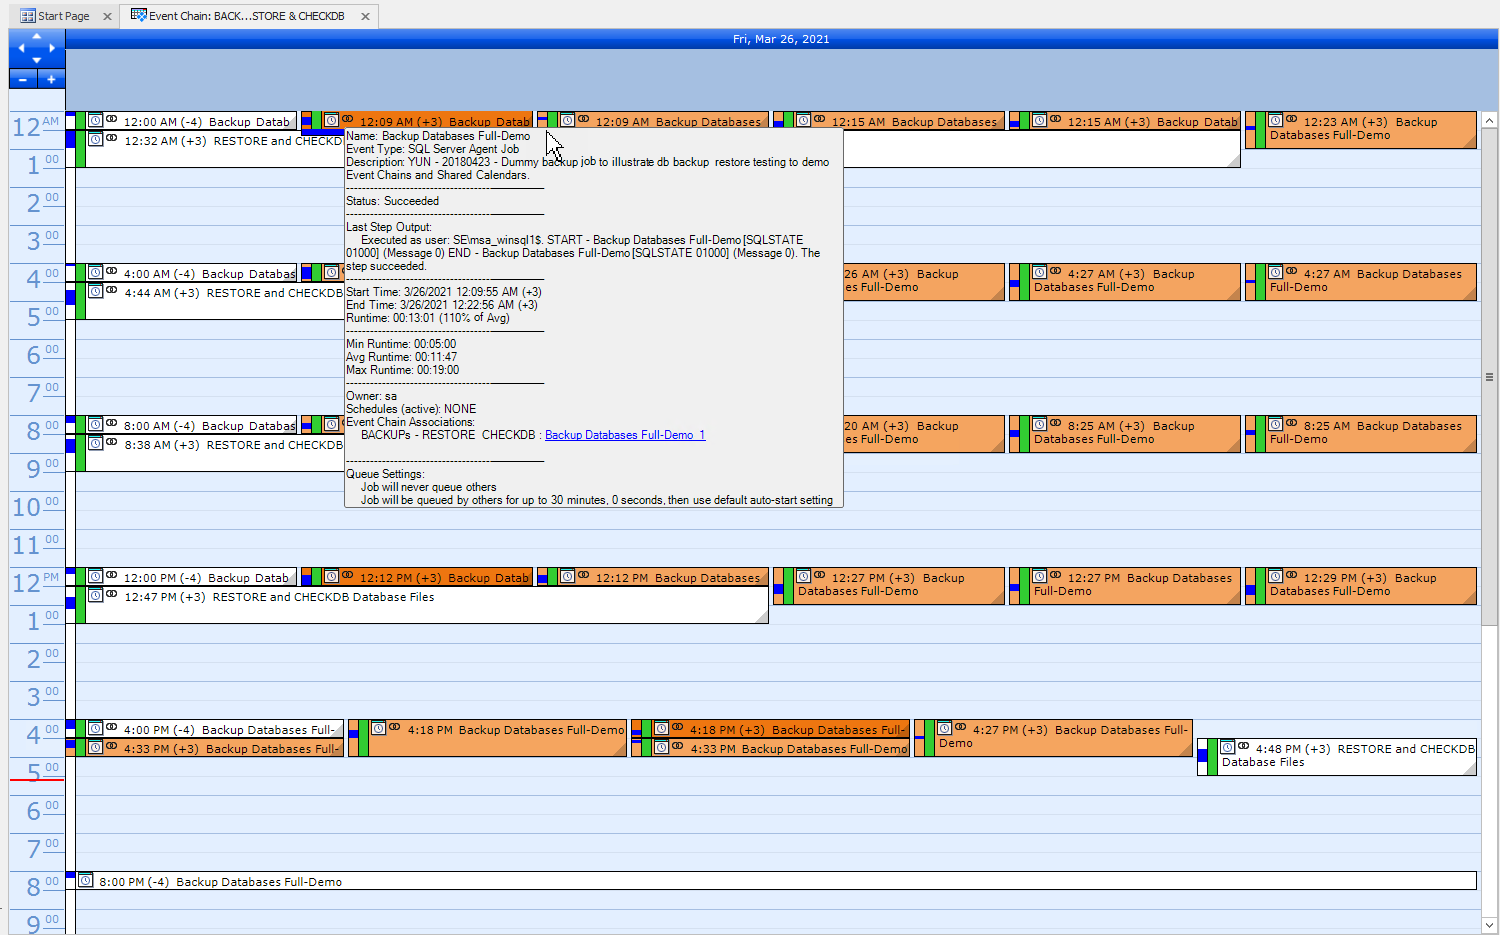 SQL Sentry Event Calendar with an Event Chain selected and the event info pop-up displayed.